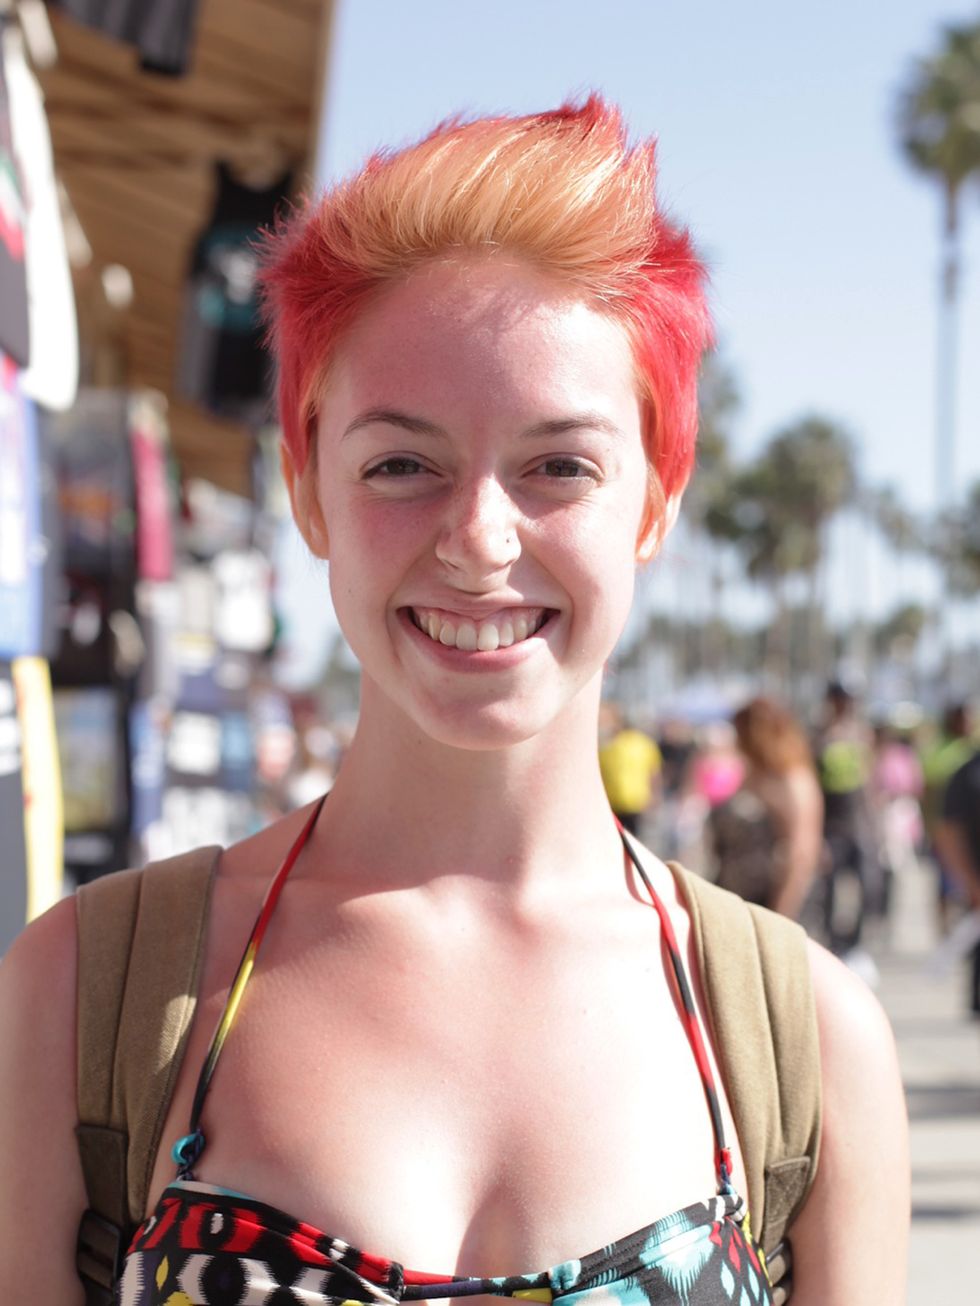 Ear, Lip, Smile, Hairstyle, Style, Summer, Beauty, Fashion, Red hair, Hair coloring, 